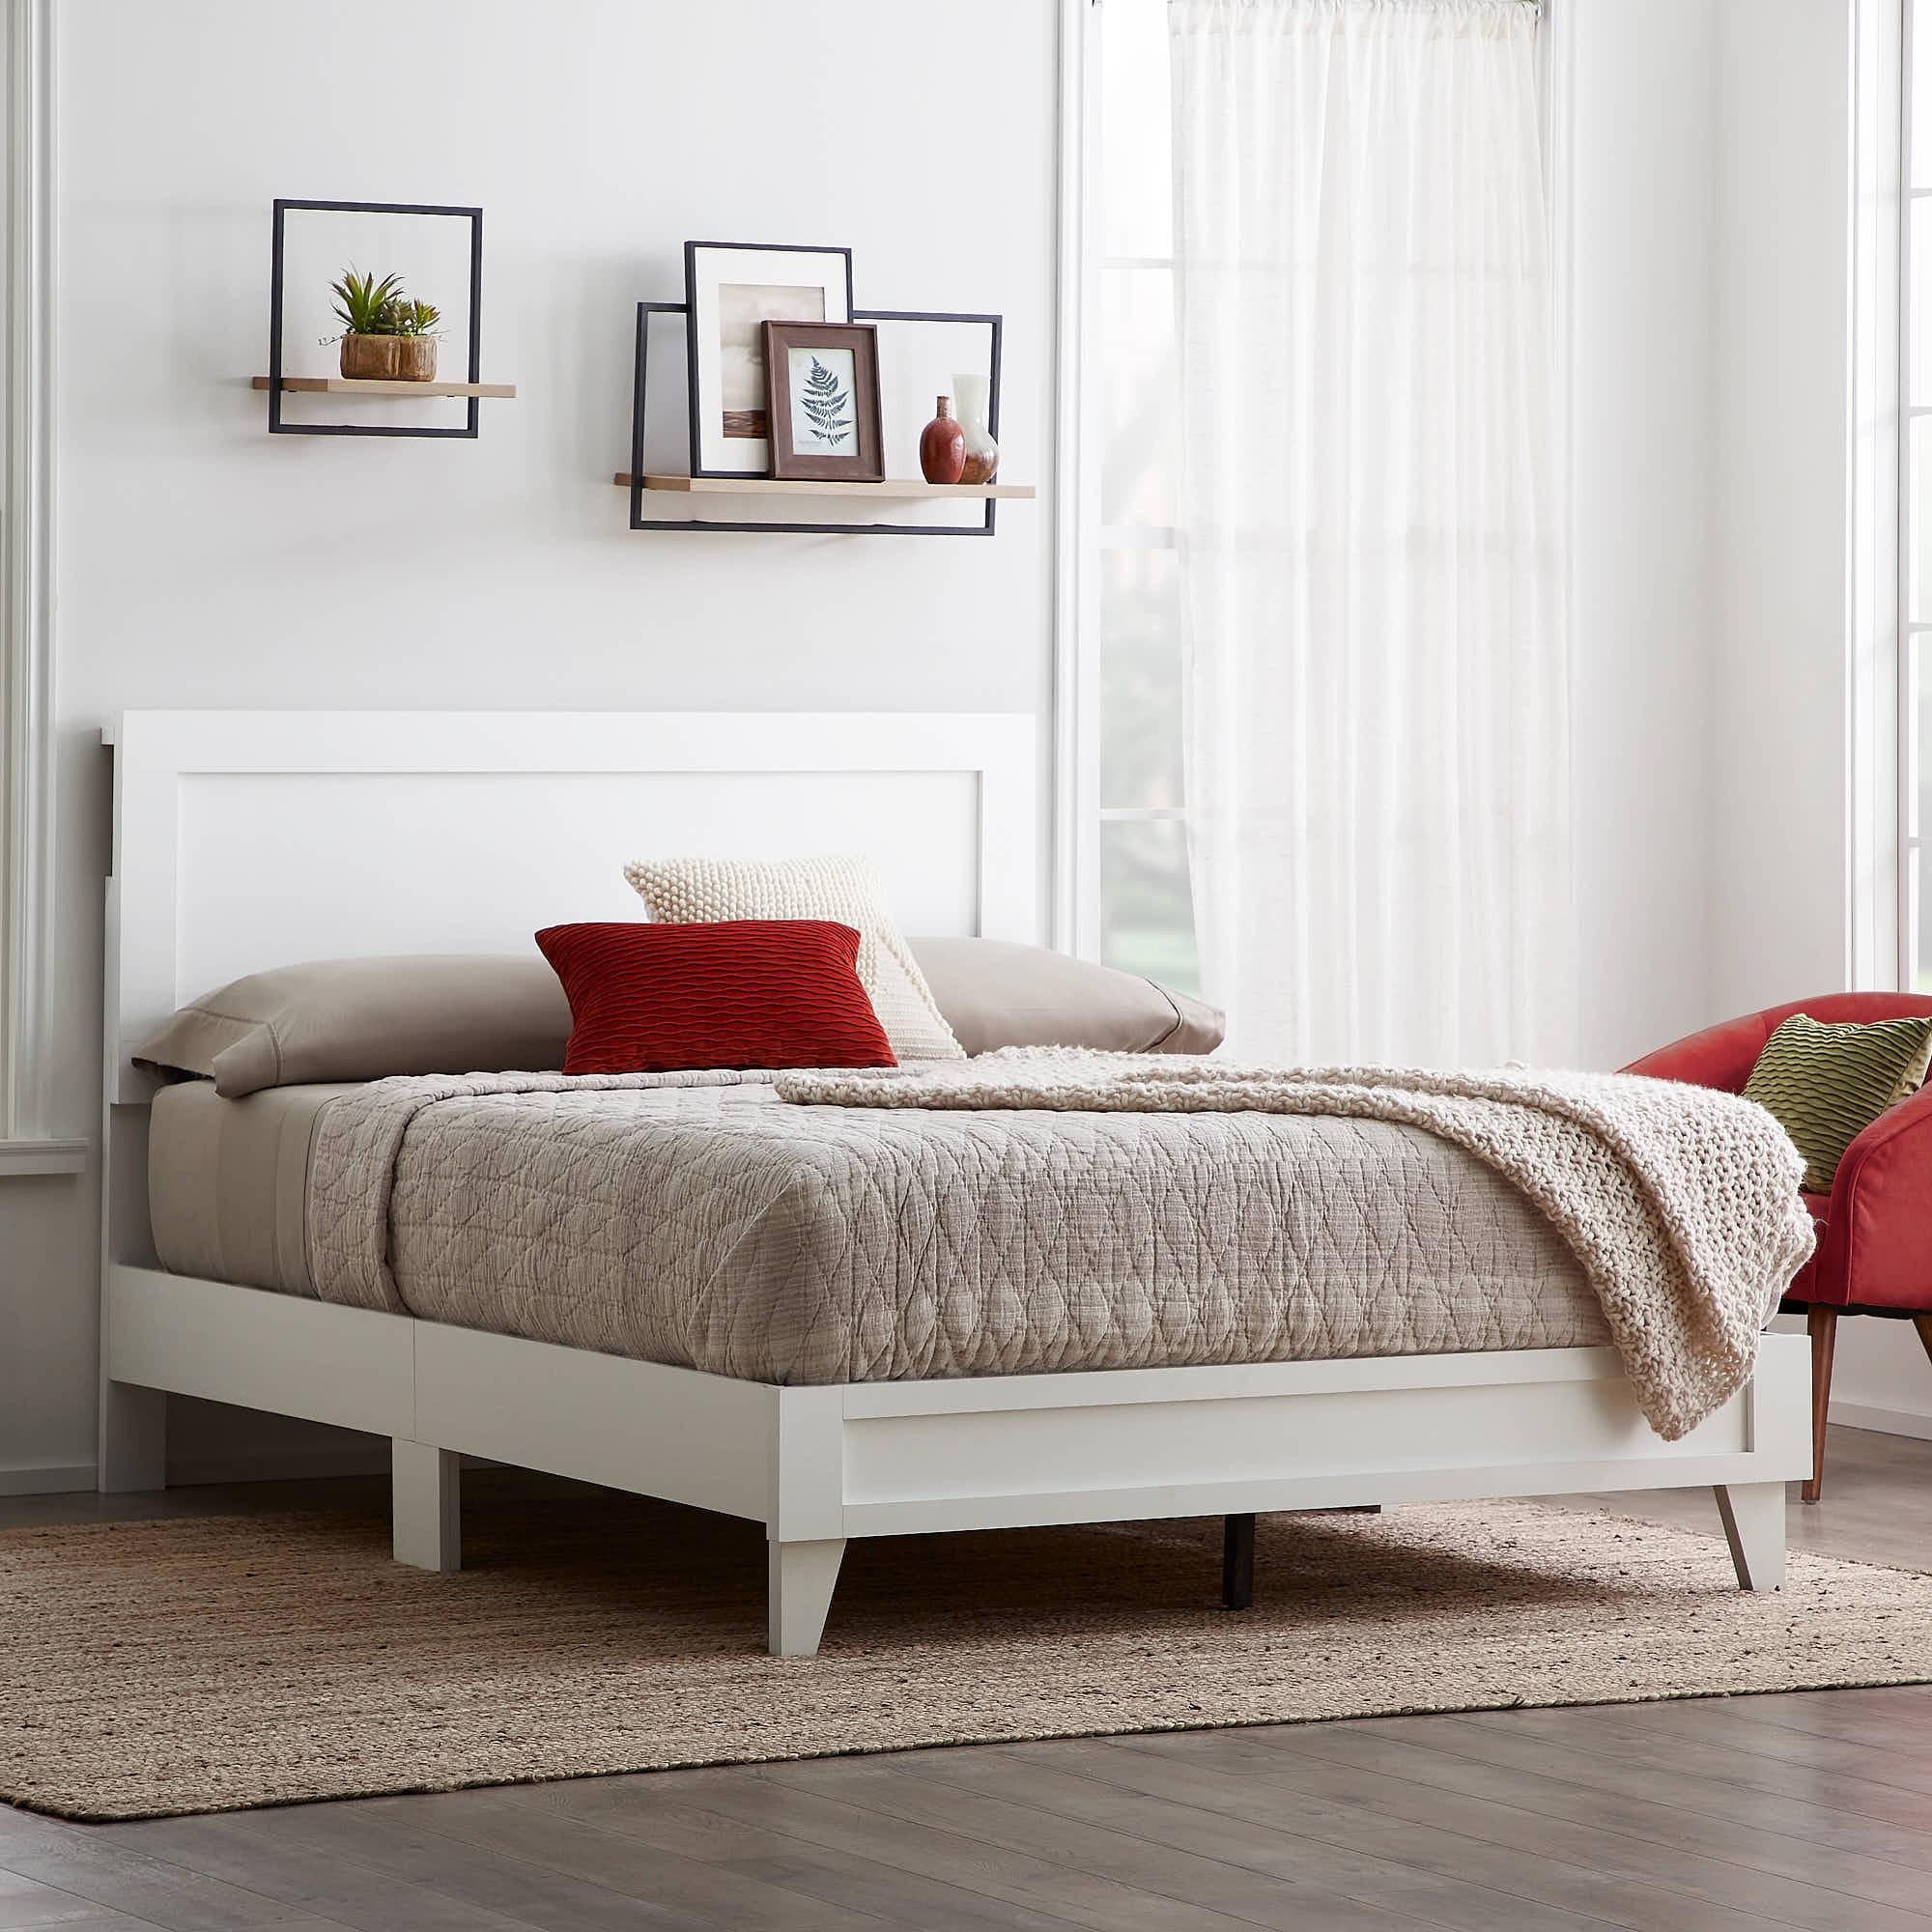 Featured image of post White Wood Platform Bed Frame King - Our larger items like beds and tables generally ship curbside freight, though white glove delivery and install may also be available for an additional.